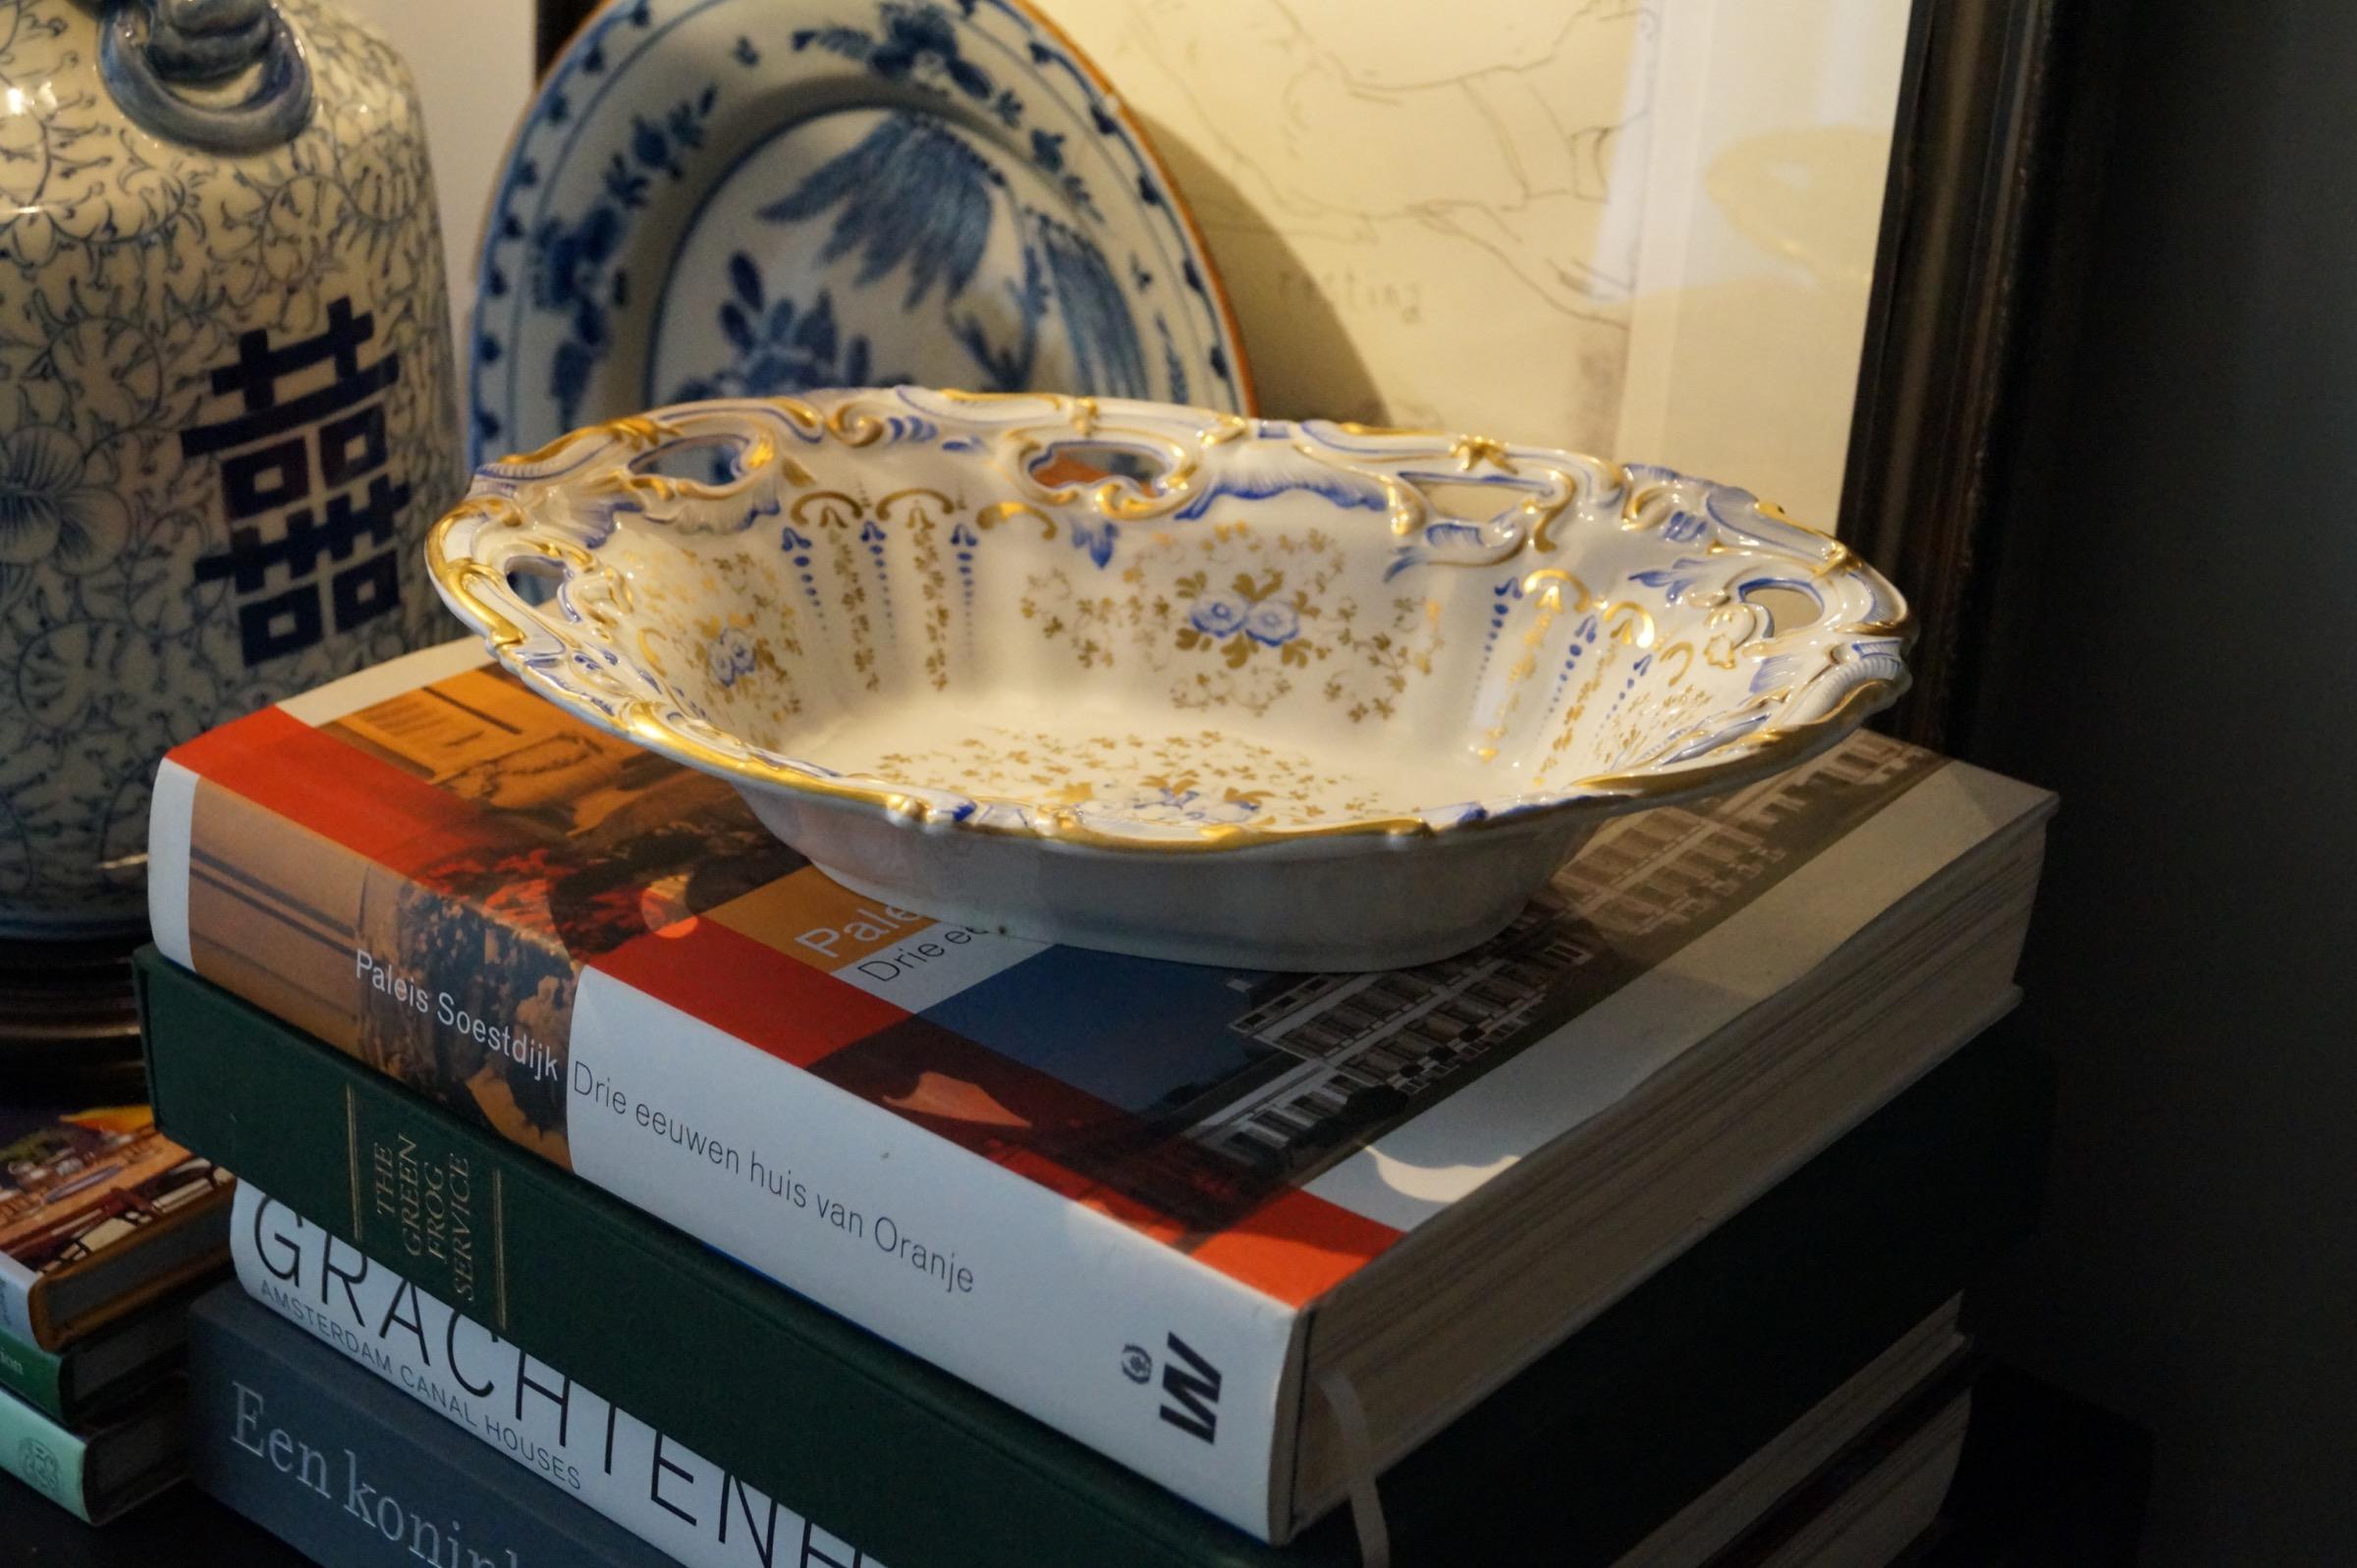 Unique and rare SPM Berlin oval dish, Germany, 1880-1900.

Richly decorated with gold and blue and a cutaway edge.

Perfect condition.
 
Measures: 30 cm x 21.5 cm. Height 6.5 cm.